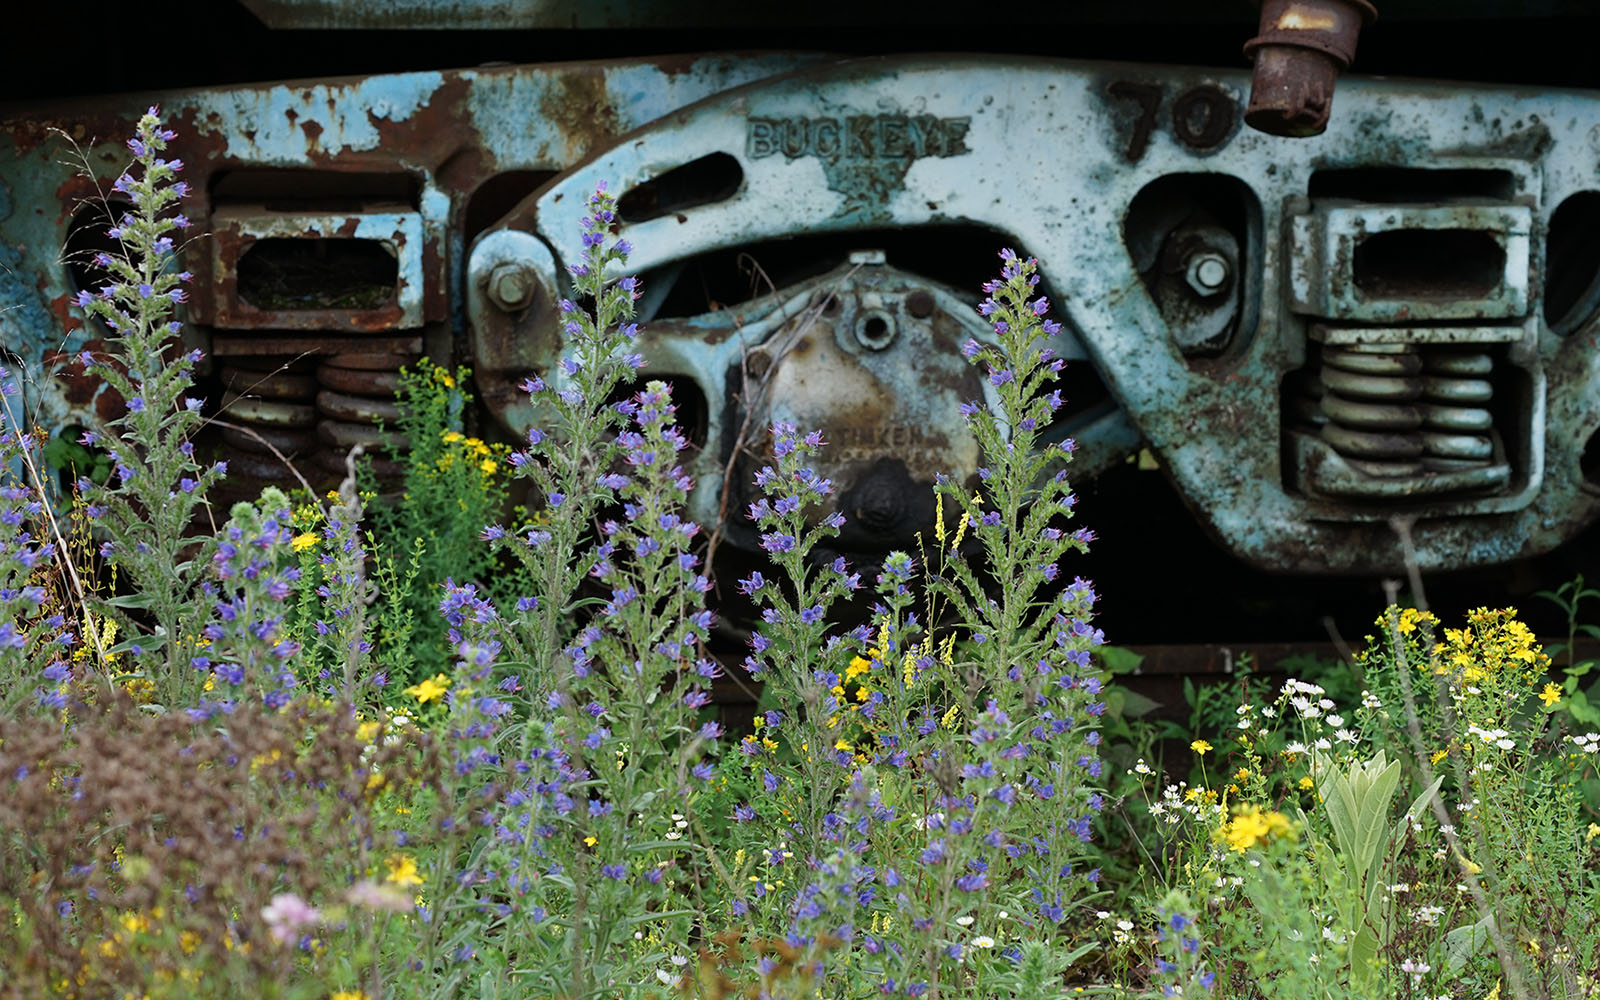 Wildflowers in front of a rusty machine